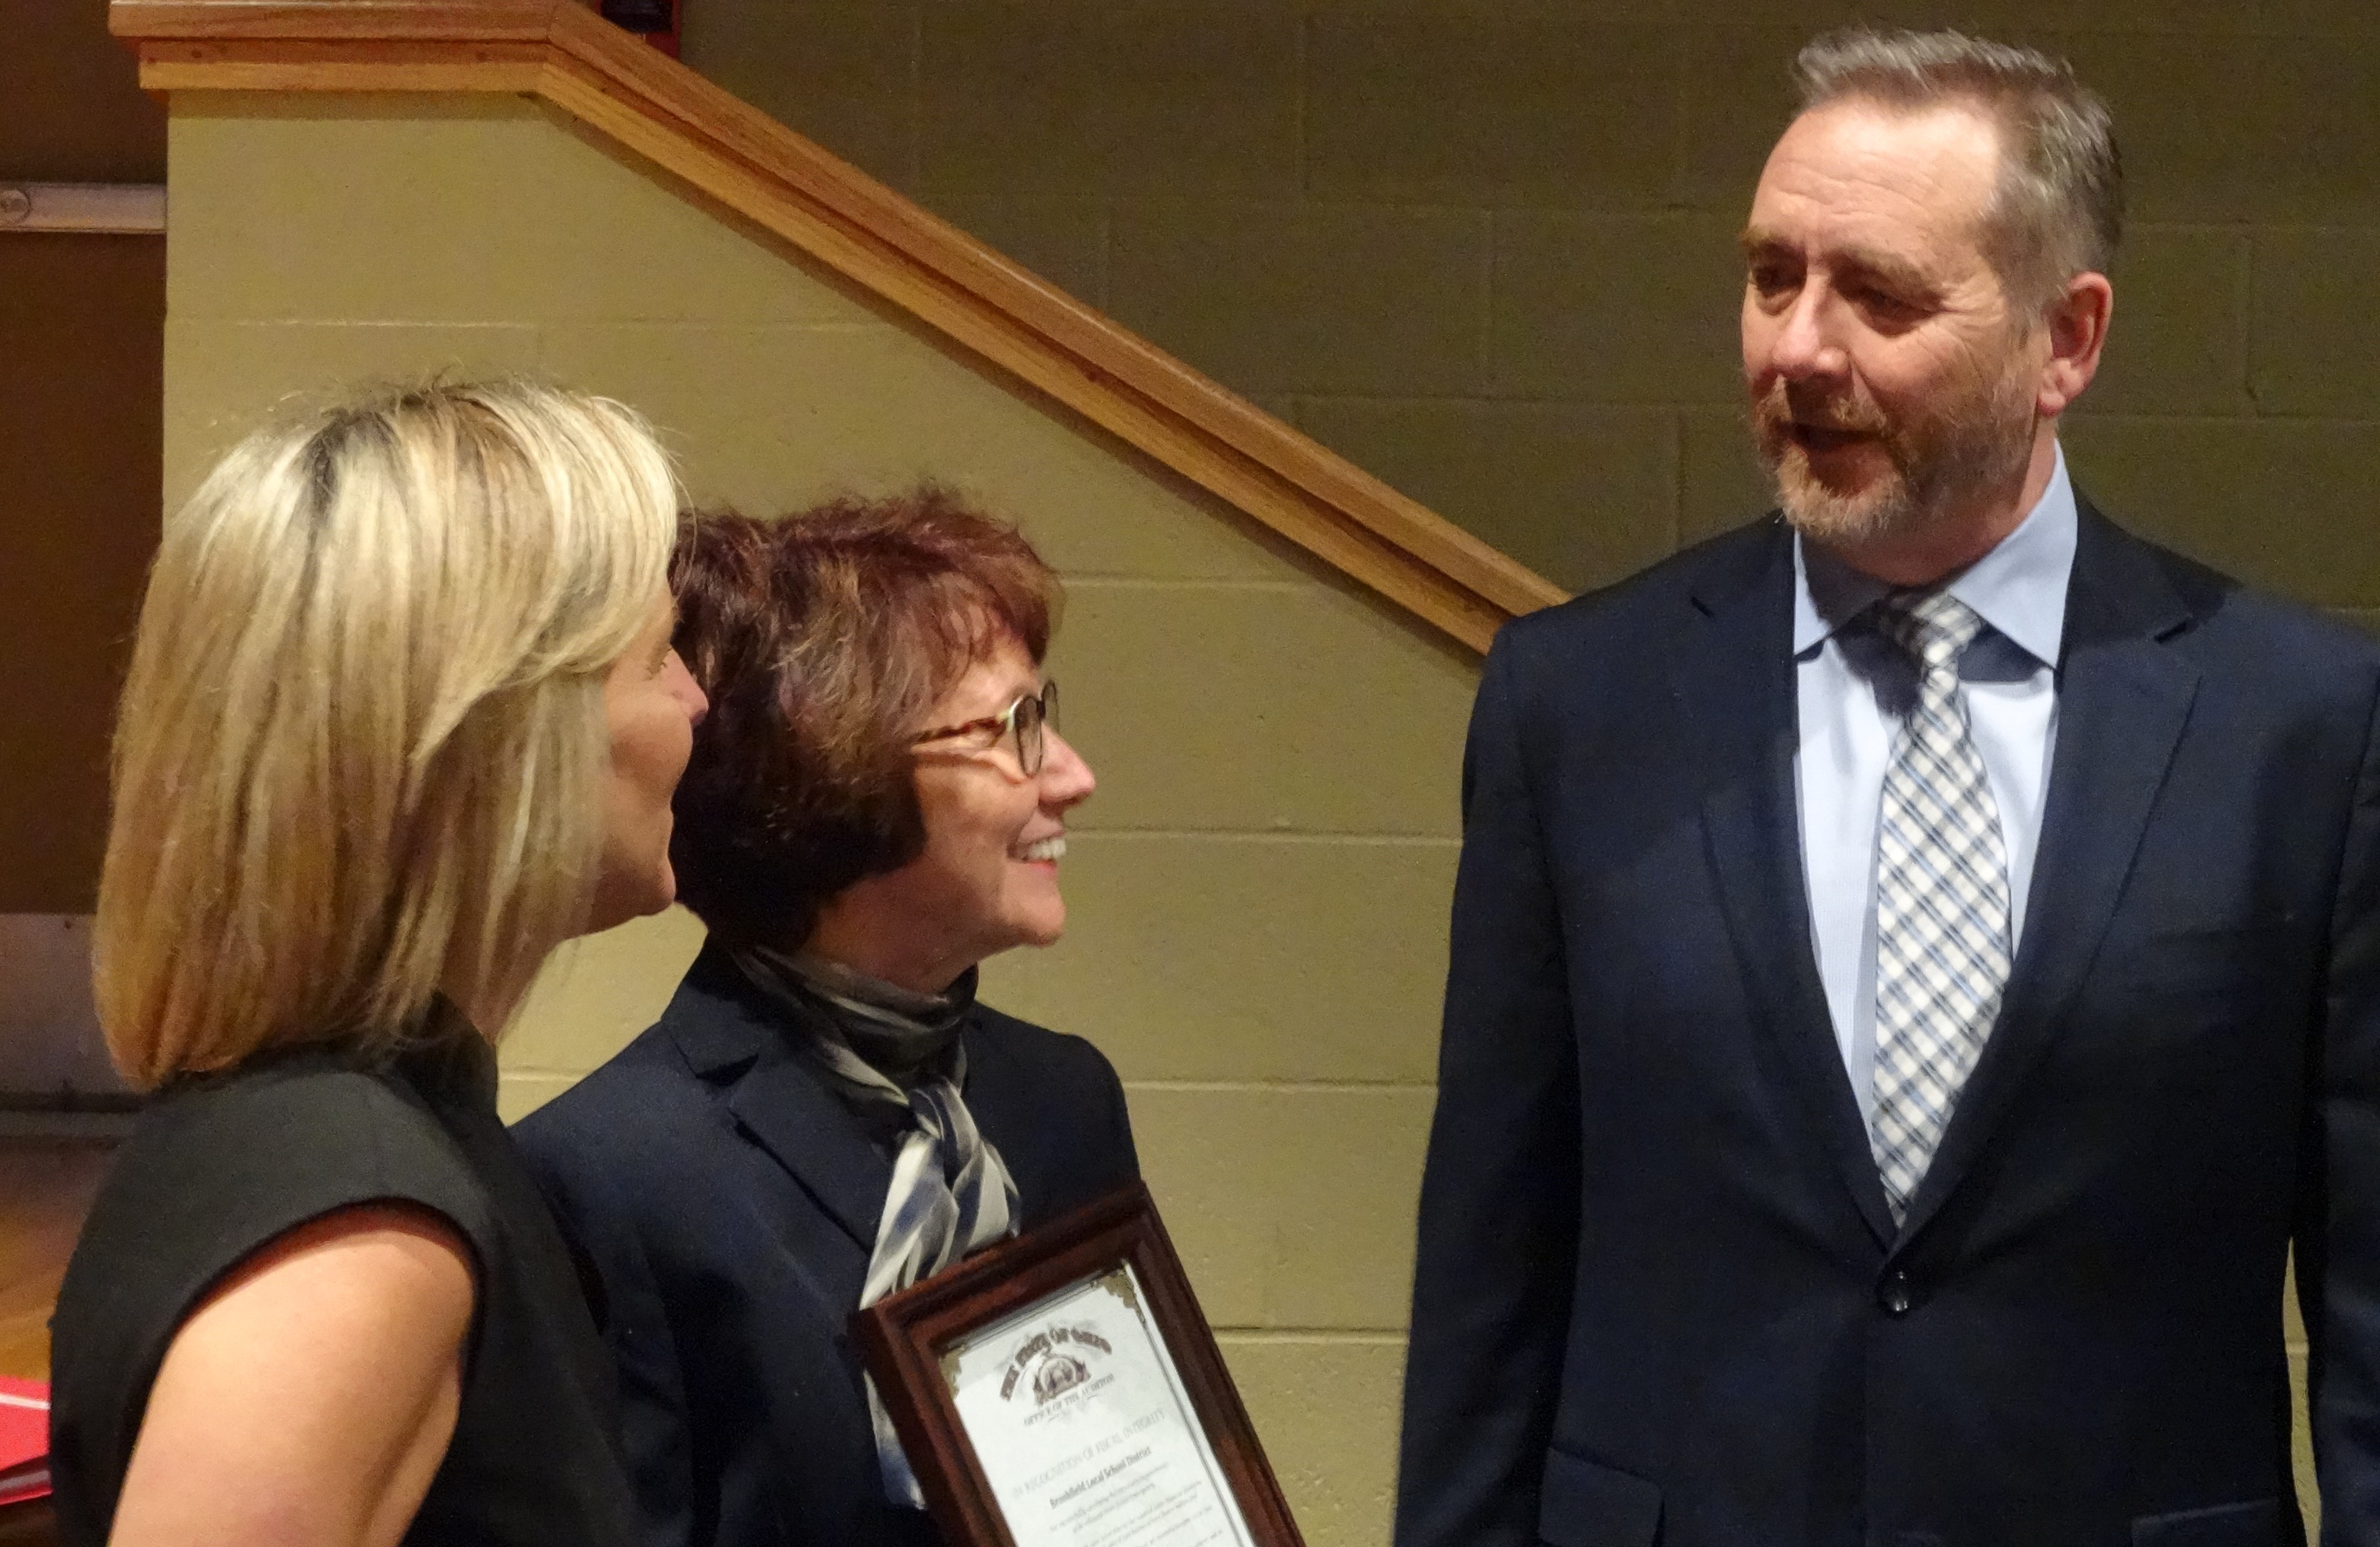 Ohio Auditor of State Dave Yost is shown with Brookfield Board of Education President Kelly Carrier, left, and school Superintendent Velina Jo Taylor.